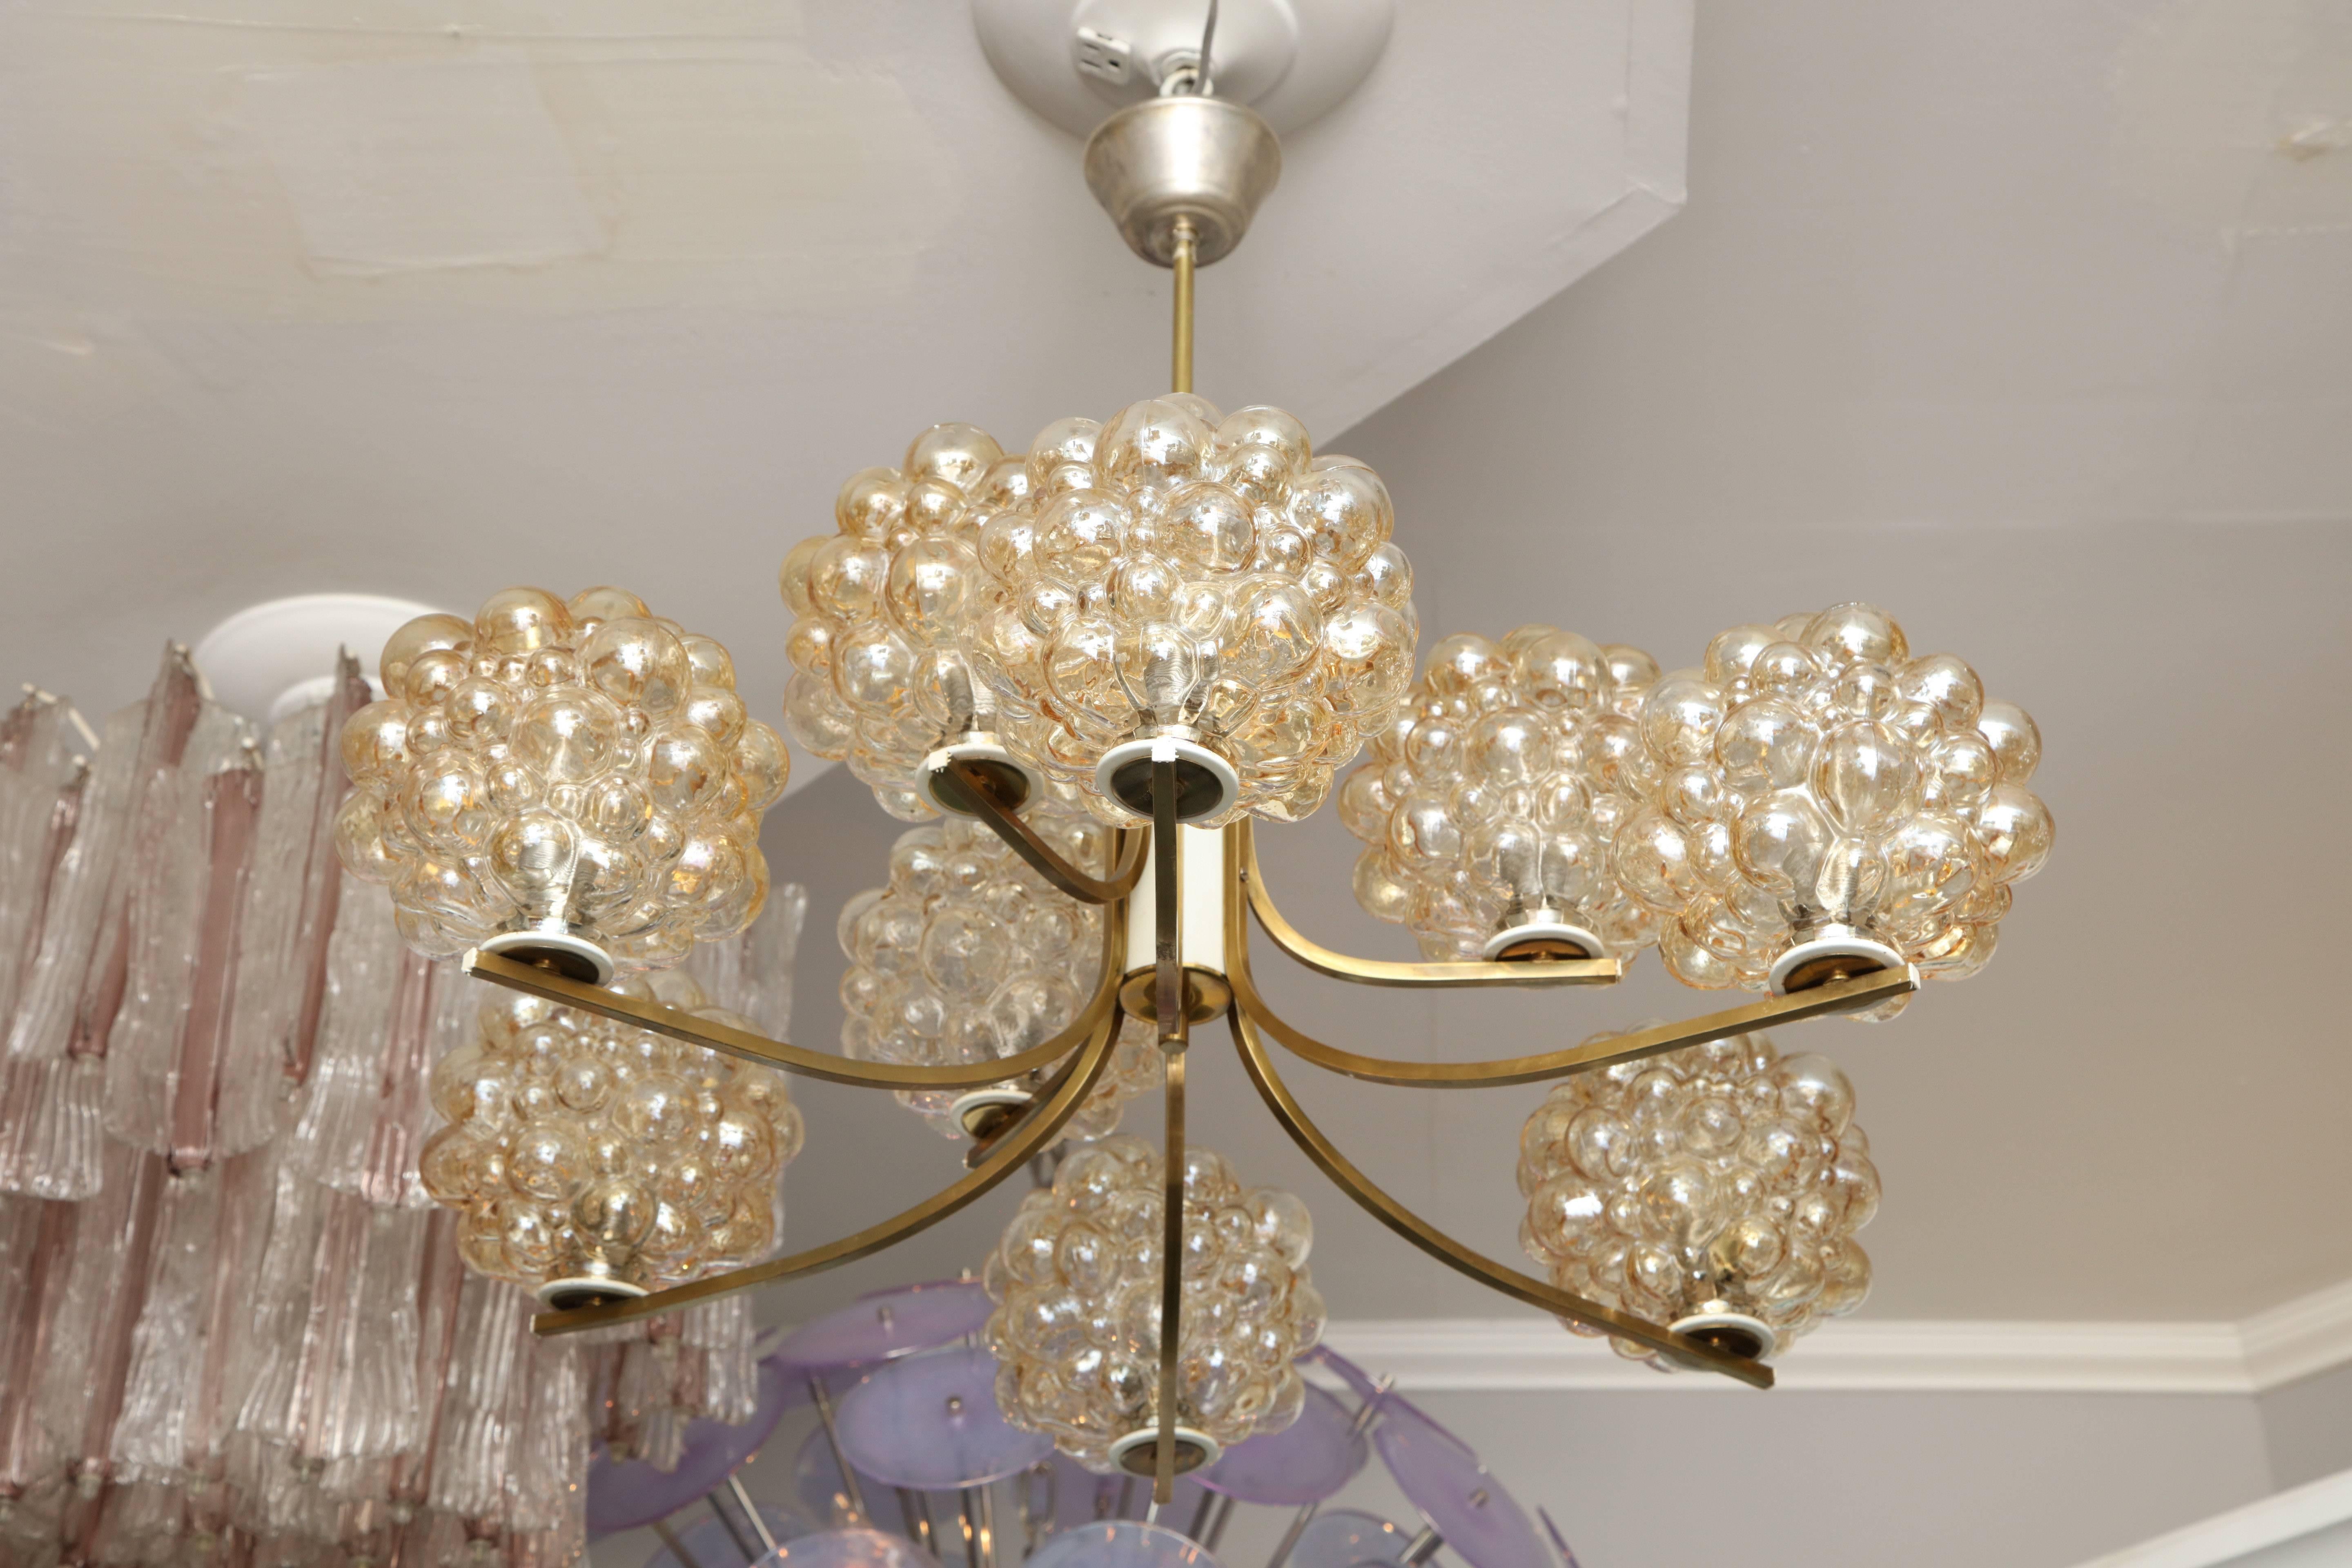 Vintage Limburg chandelier by Helena Tynell.